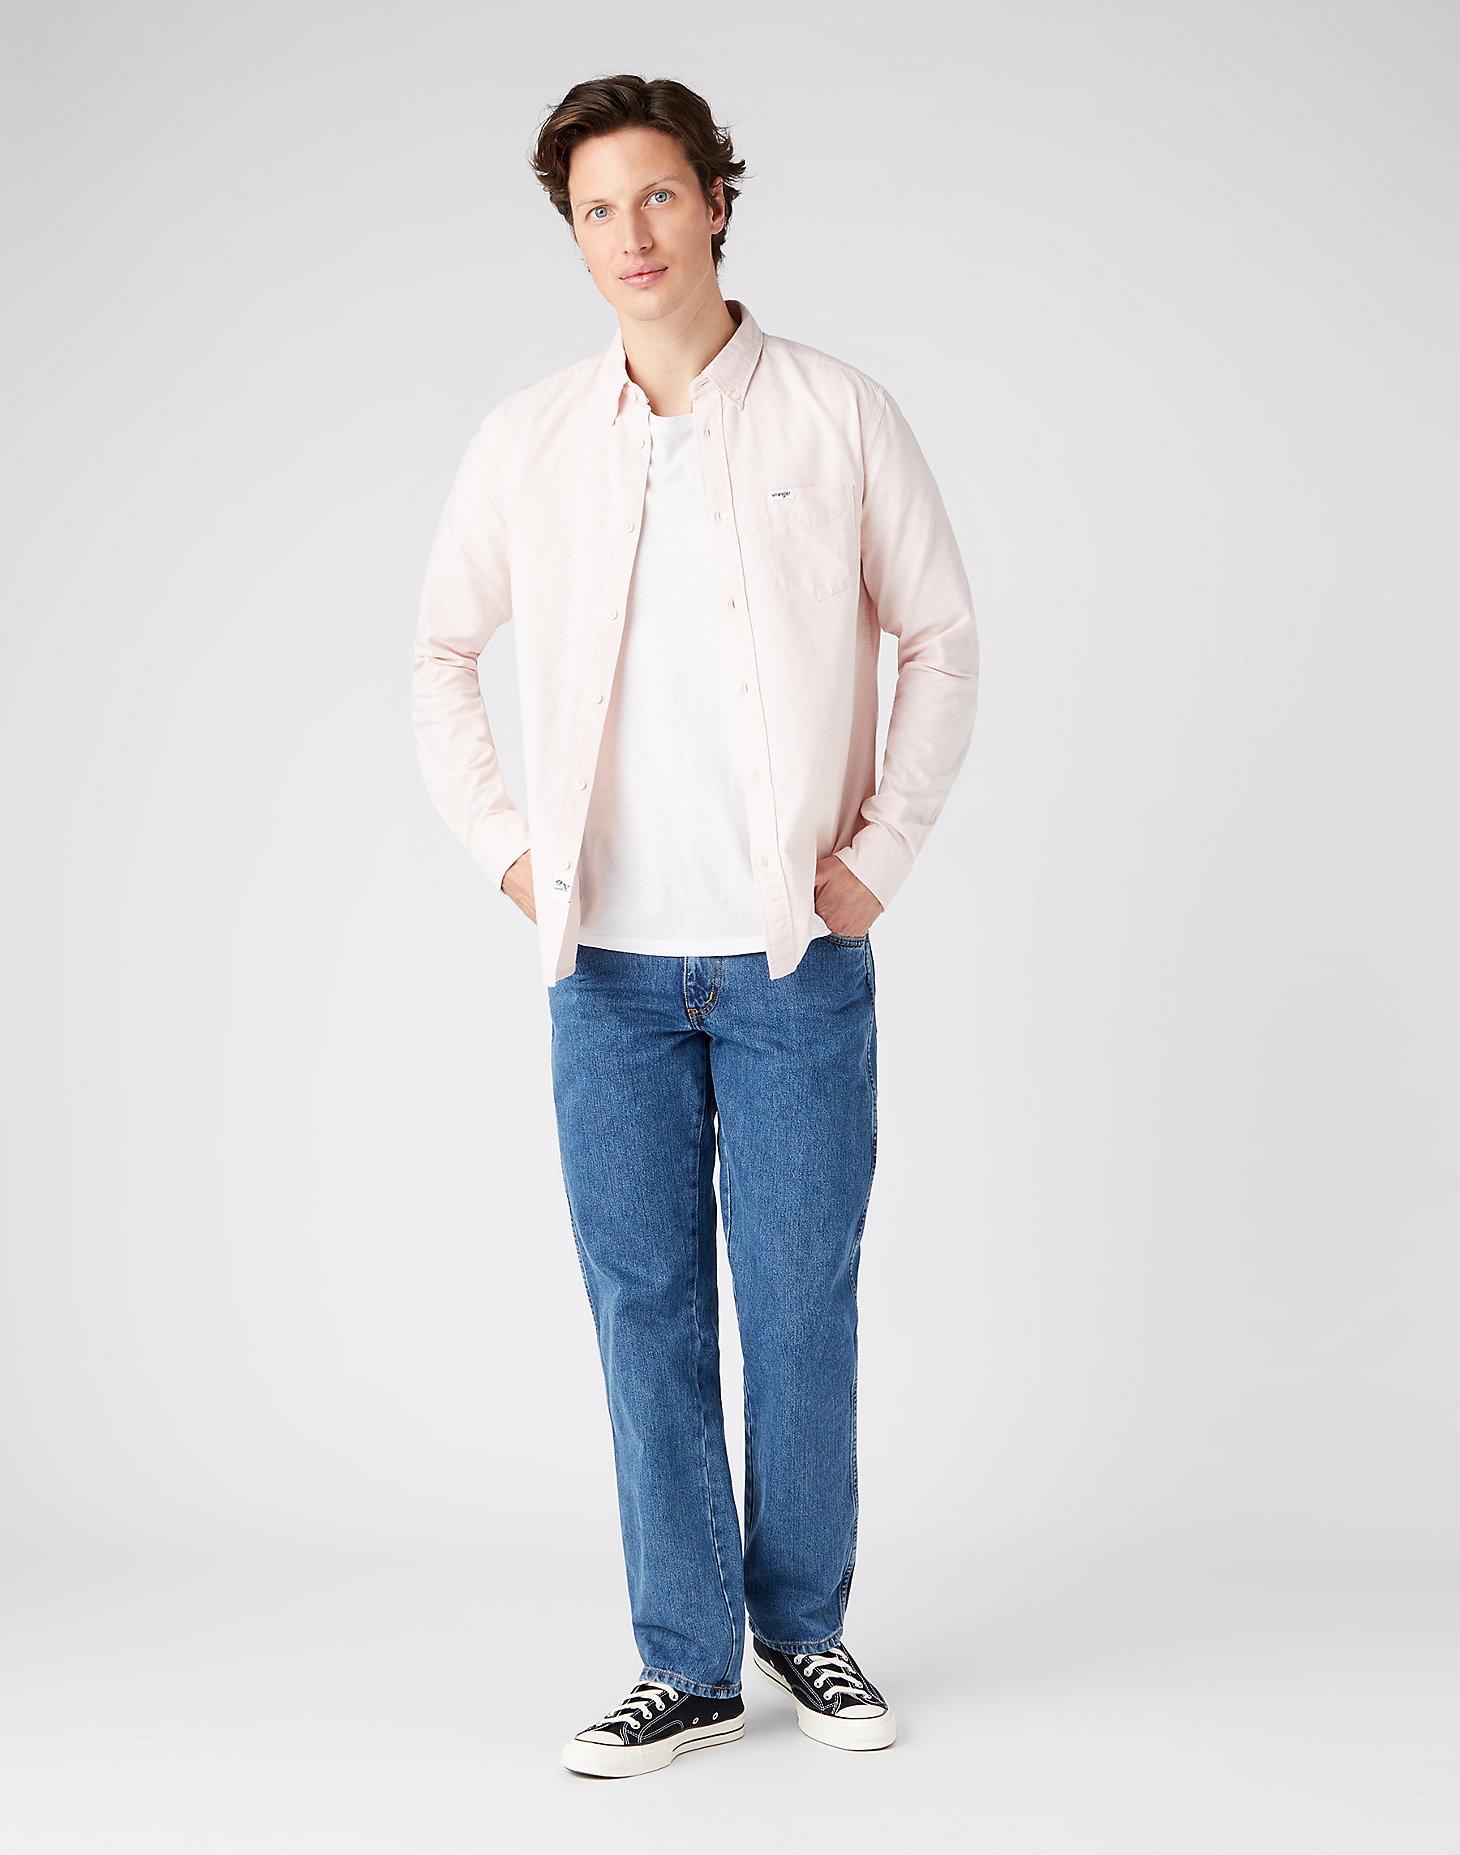 Long Sleeve One Pocket Shirt in Pearl Blush alternative view 1